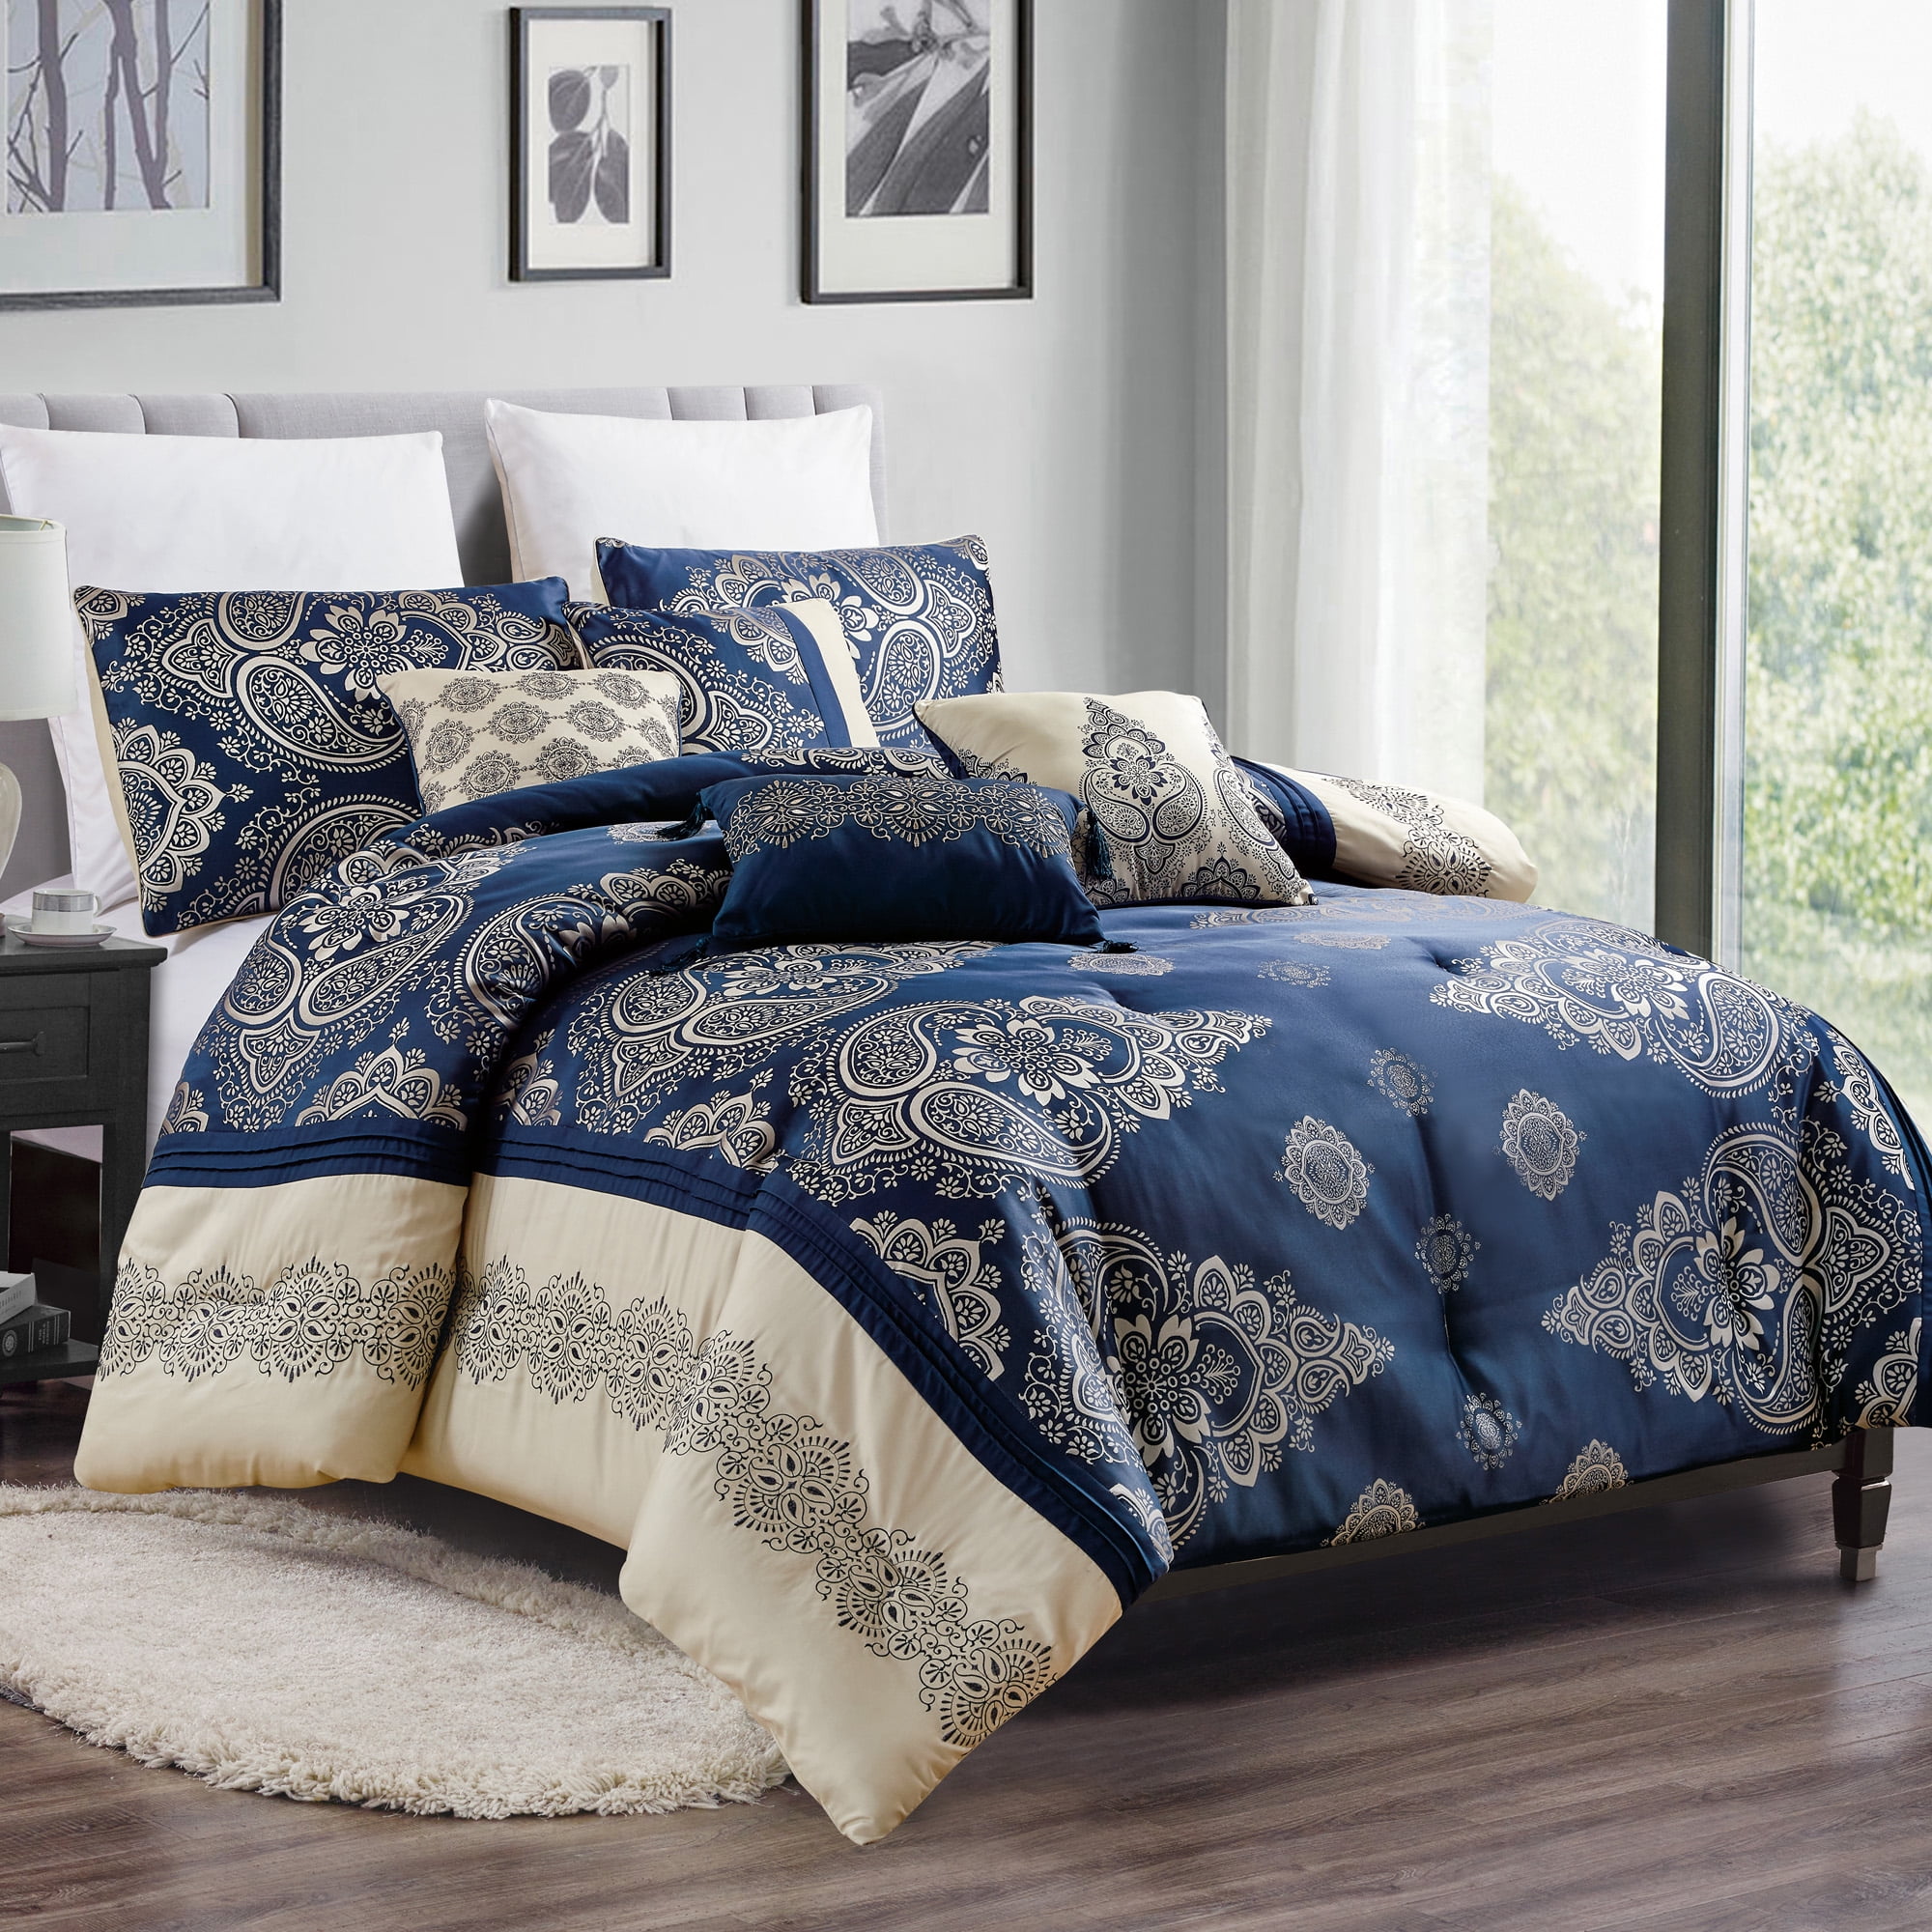 Clearance Bedding Comforter Duvet Super, Navy Blue And Gold Bed Sheets